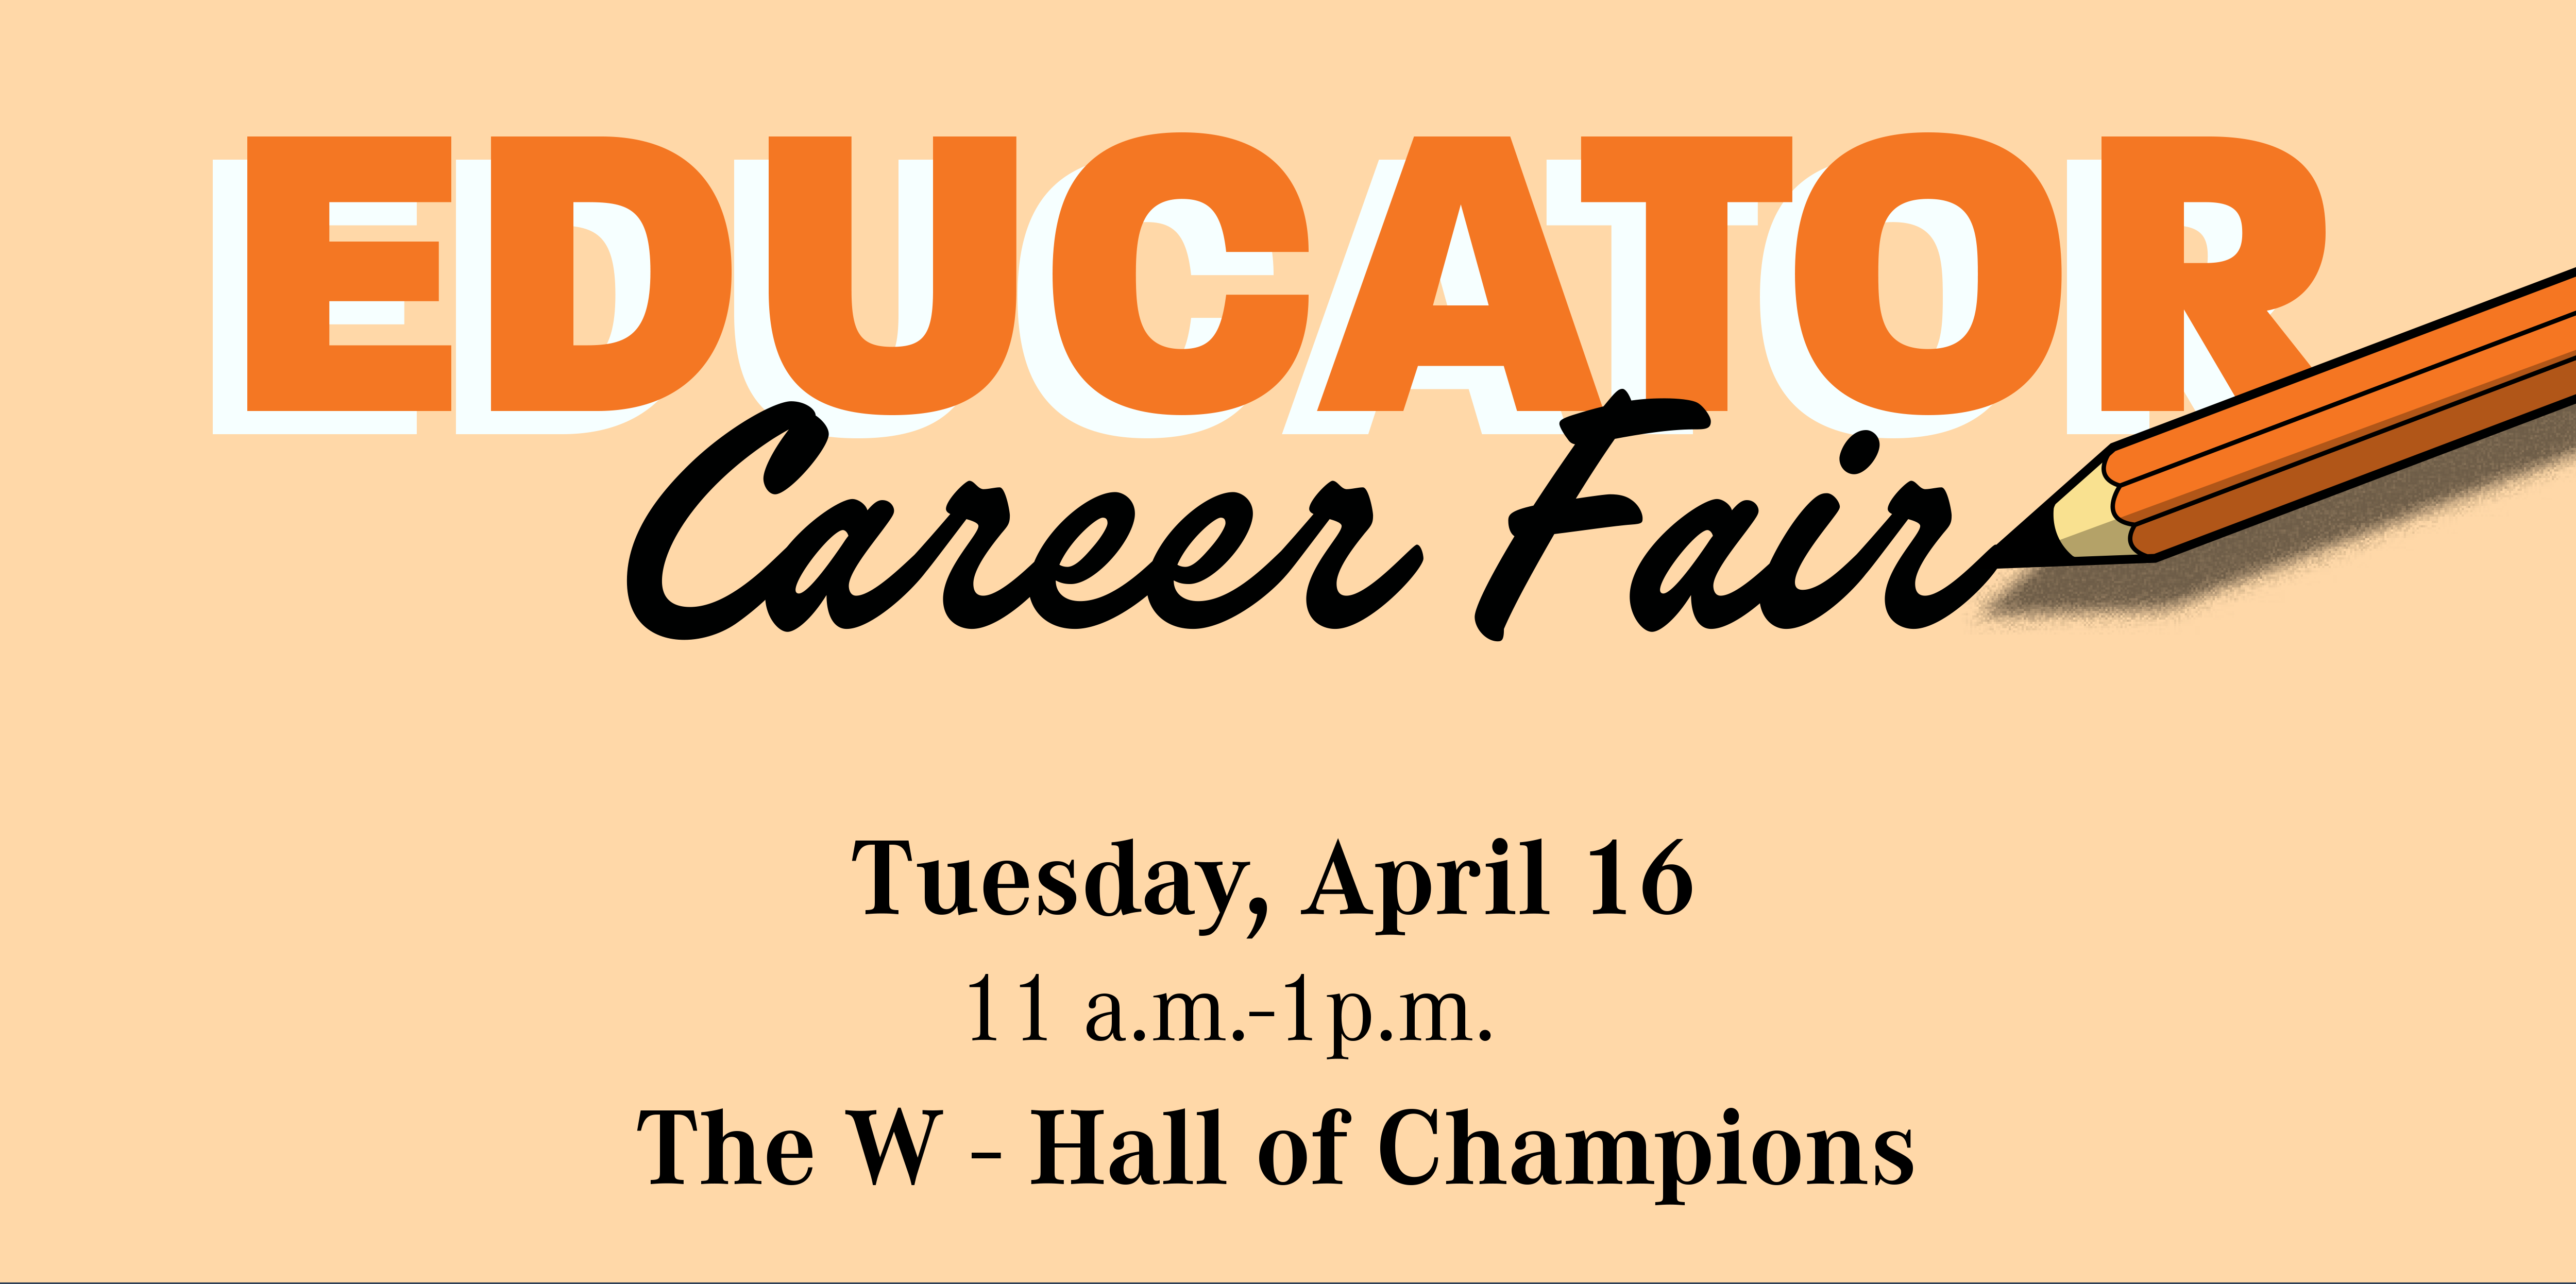 Educator Career Fair: Tuesday, April 16, 11 a.m. to 1 p.m., The W's Hall of Champions.